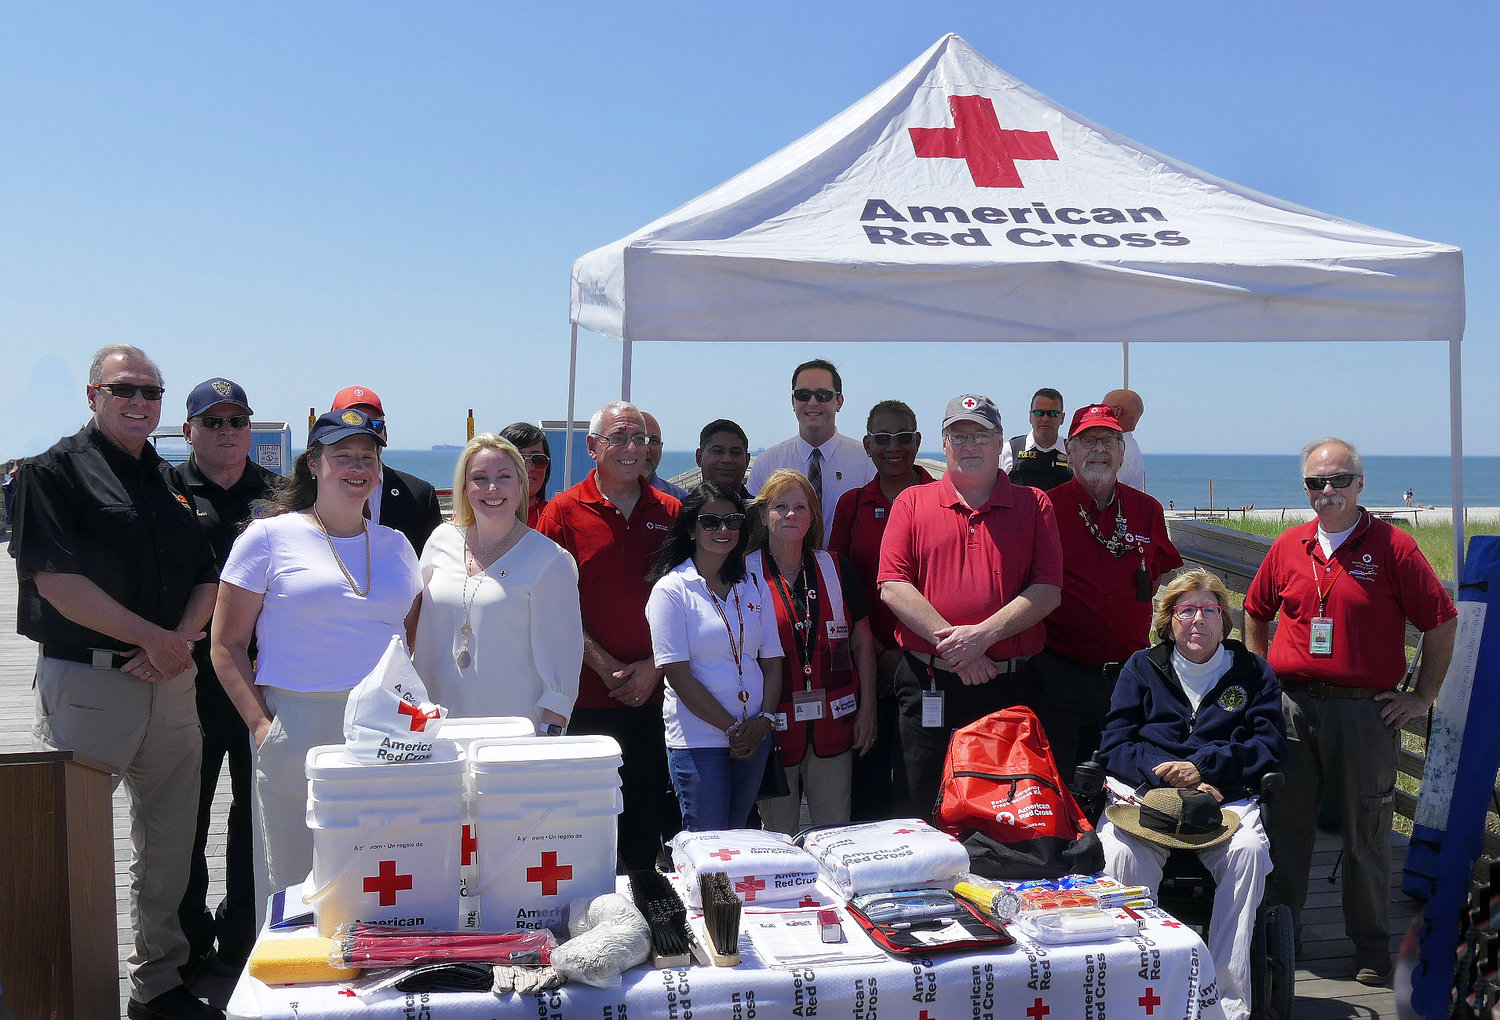 Members of American Red Cross were joined by local officials for a hurricane-preparedness news conference in Long Beach.